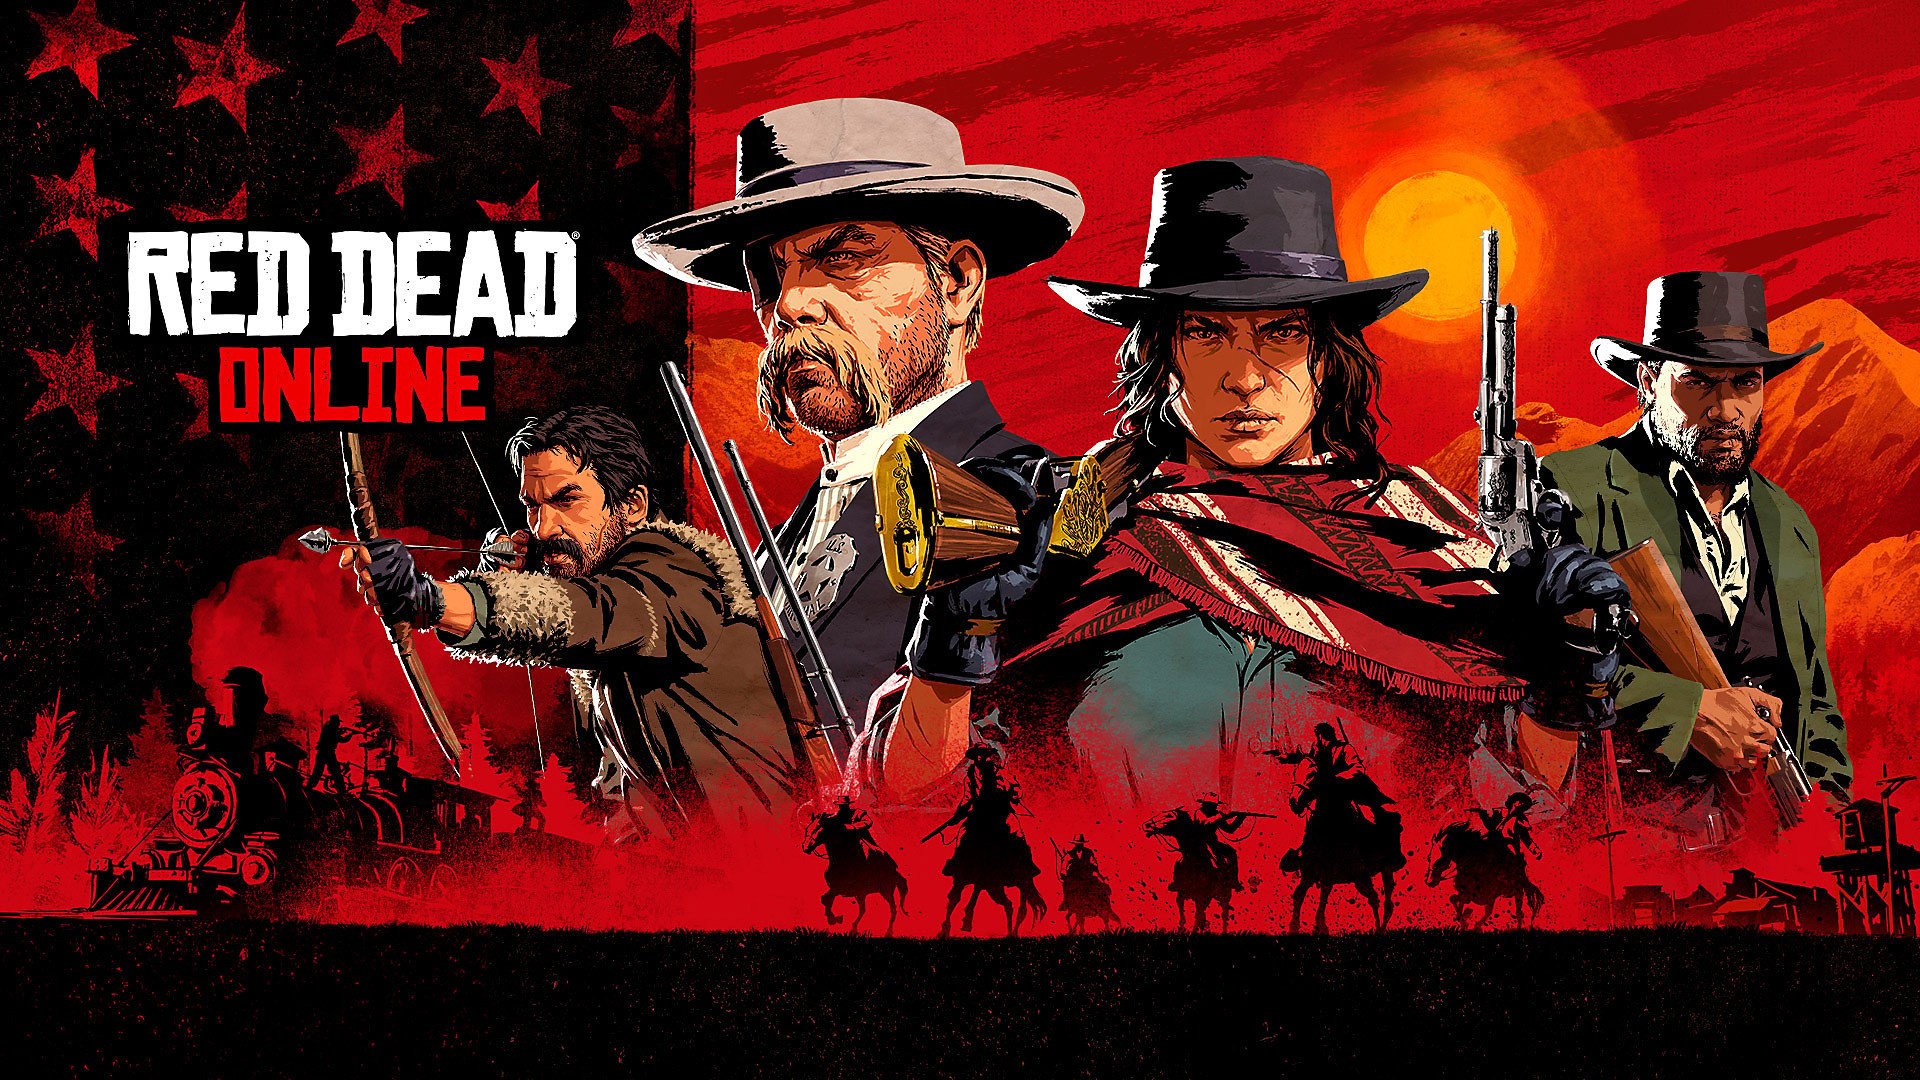 Red Dead Online is getting a Roles system